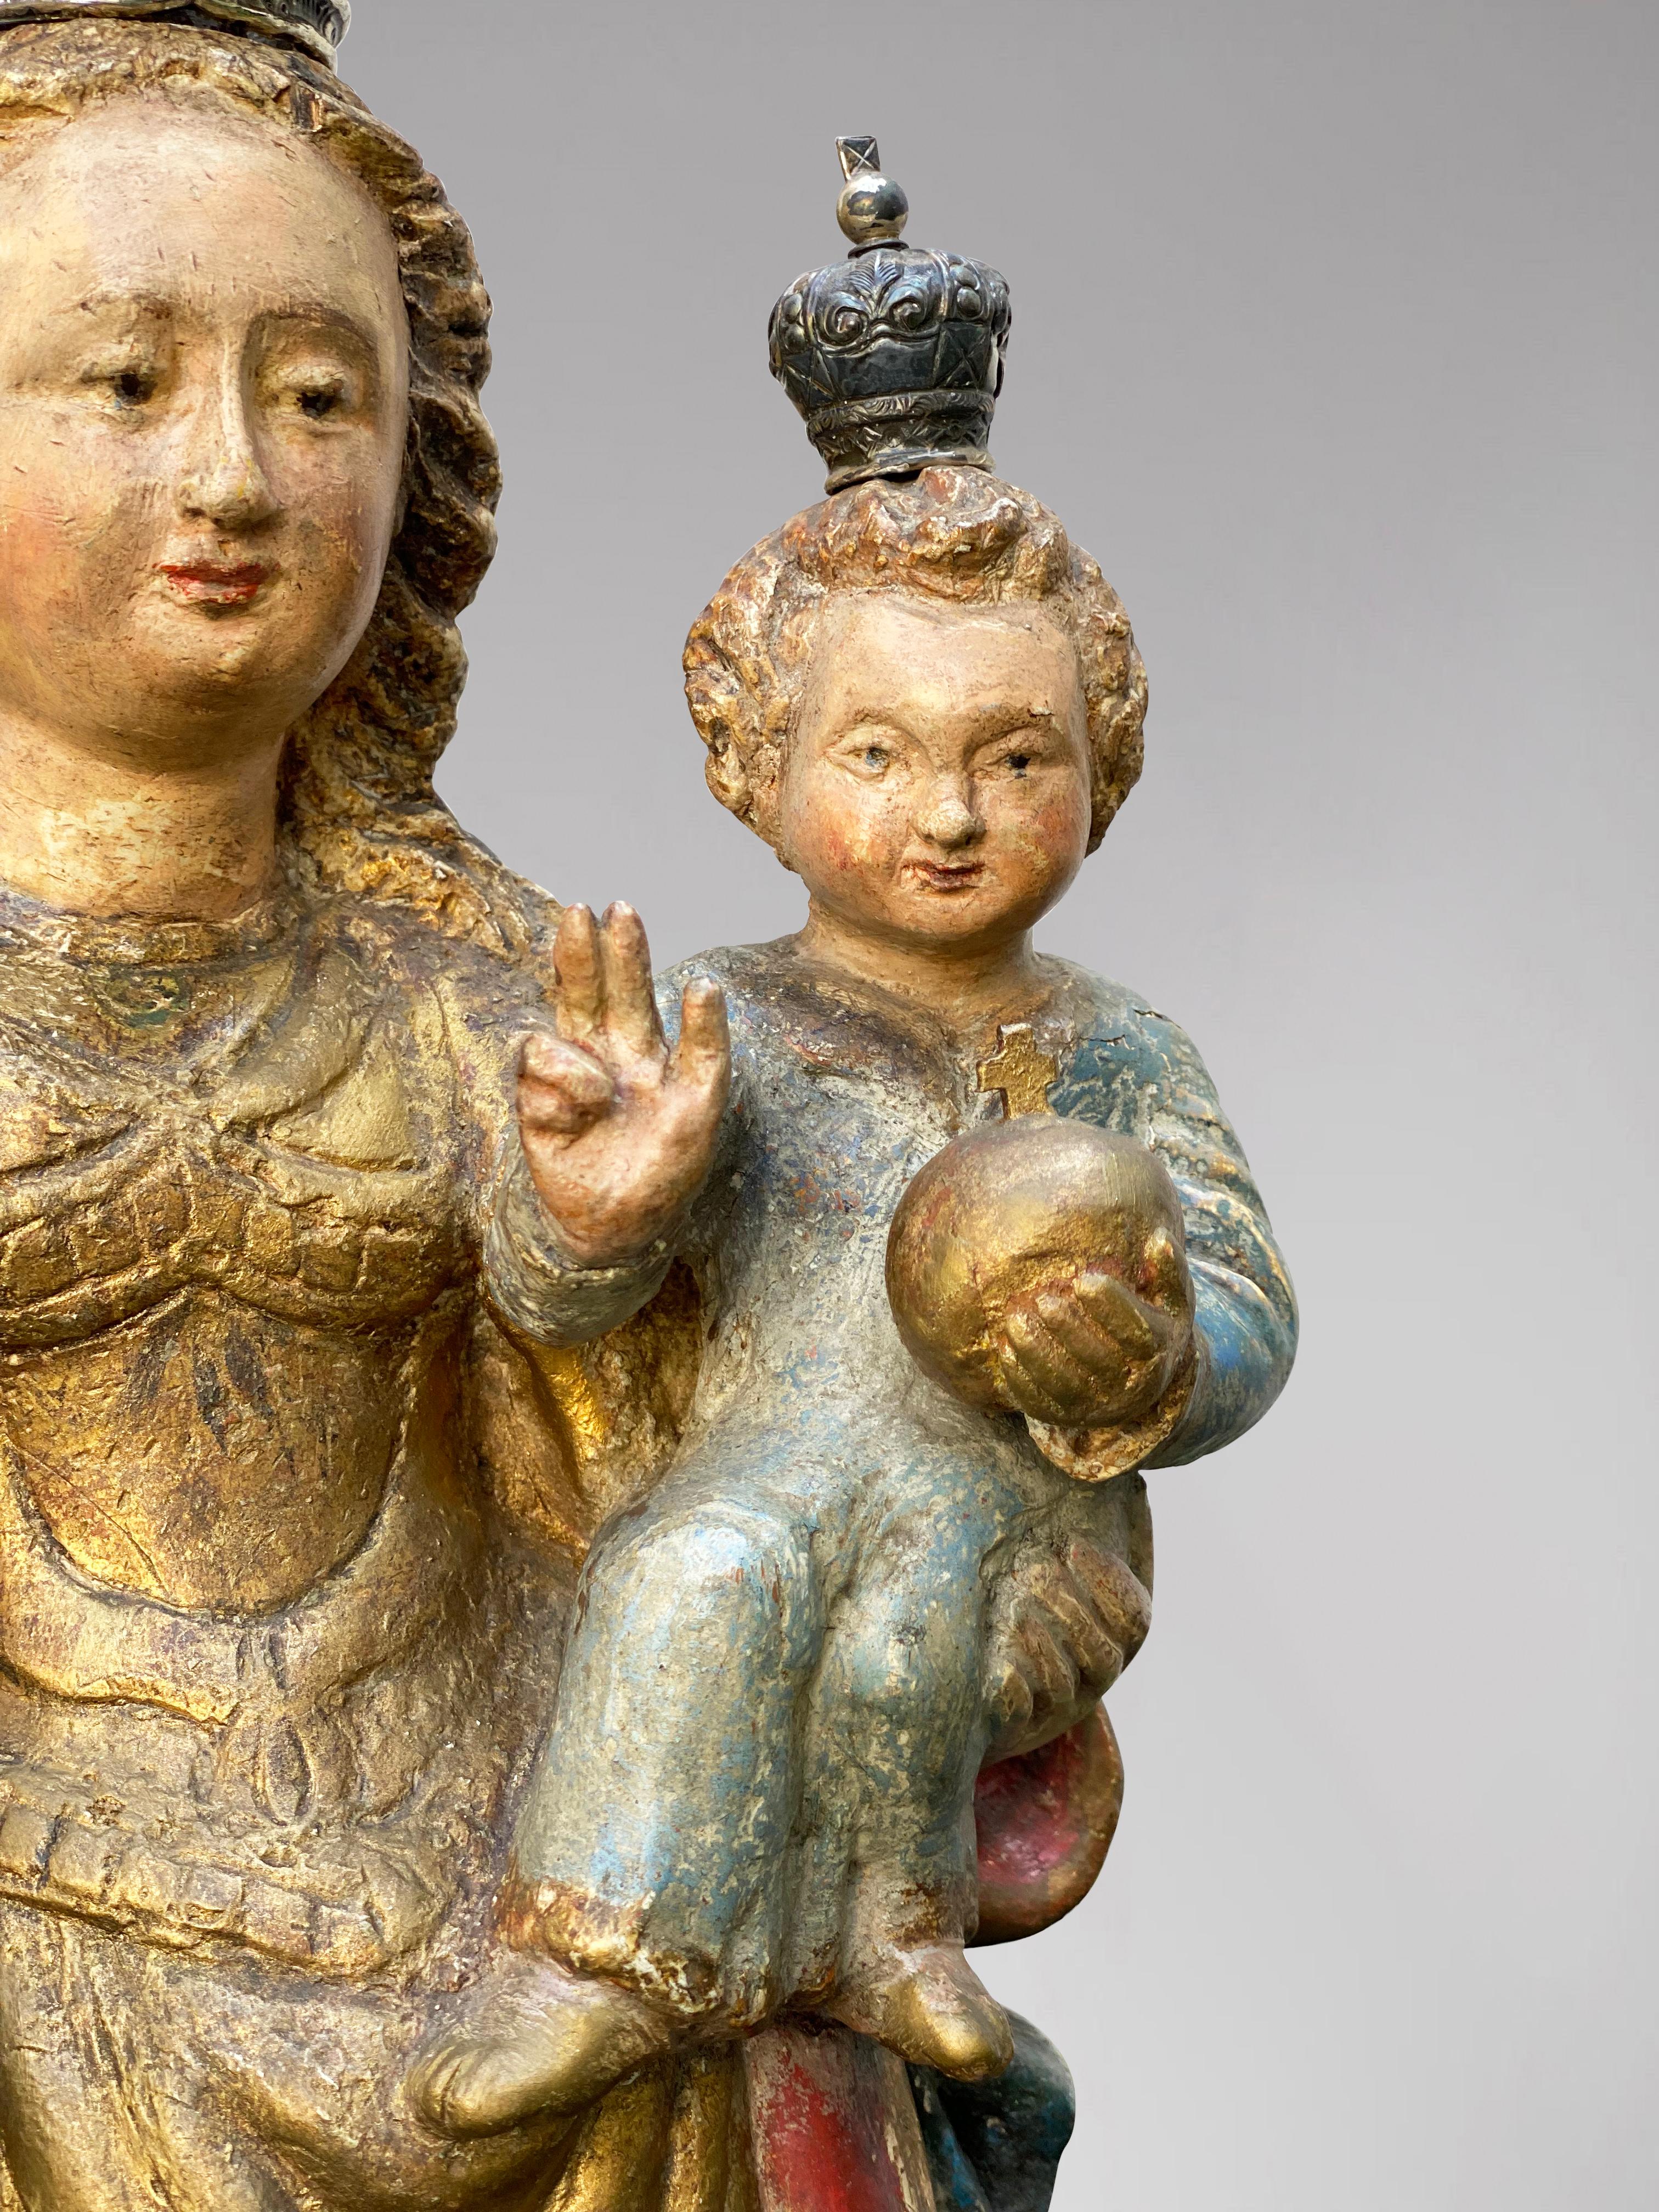 Description: A Flemish Statue of Crowned Virgin Mary with Child Jesus, 17th Century, polychromed wood, silver crowns

Statue: Crowned Madonna and Child

Object Type: Statuette

Artist, Sculptor / Creator: Unknown

Place of Origin: Flanders

Period: